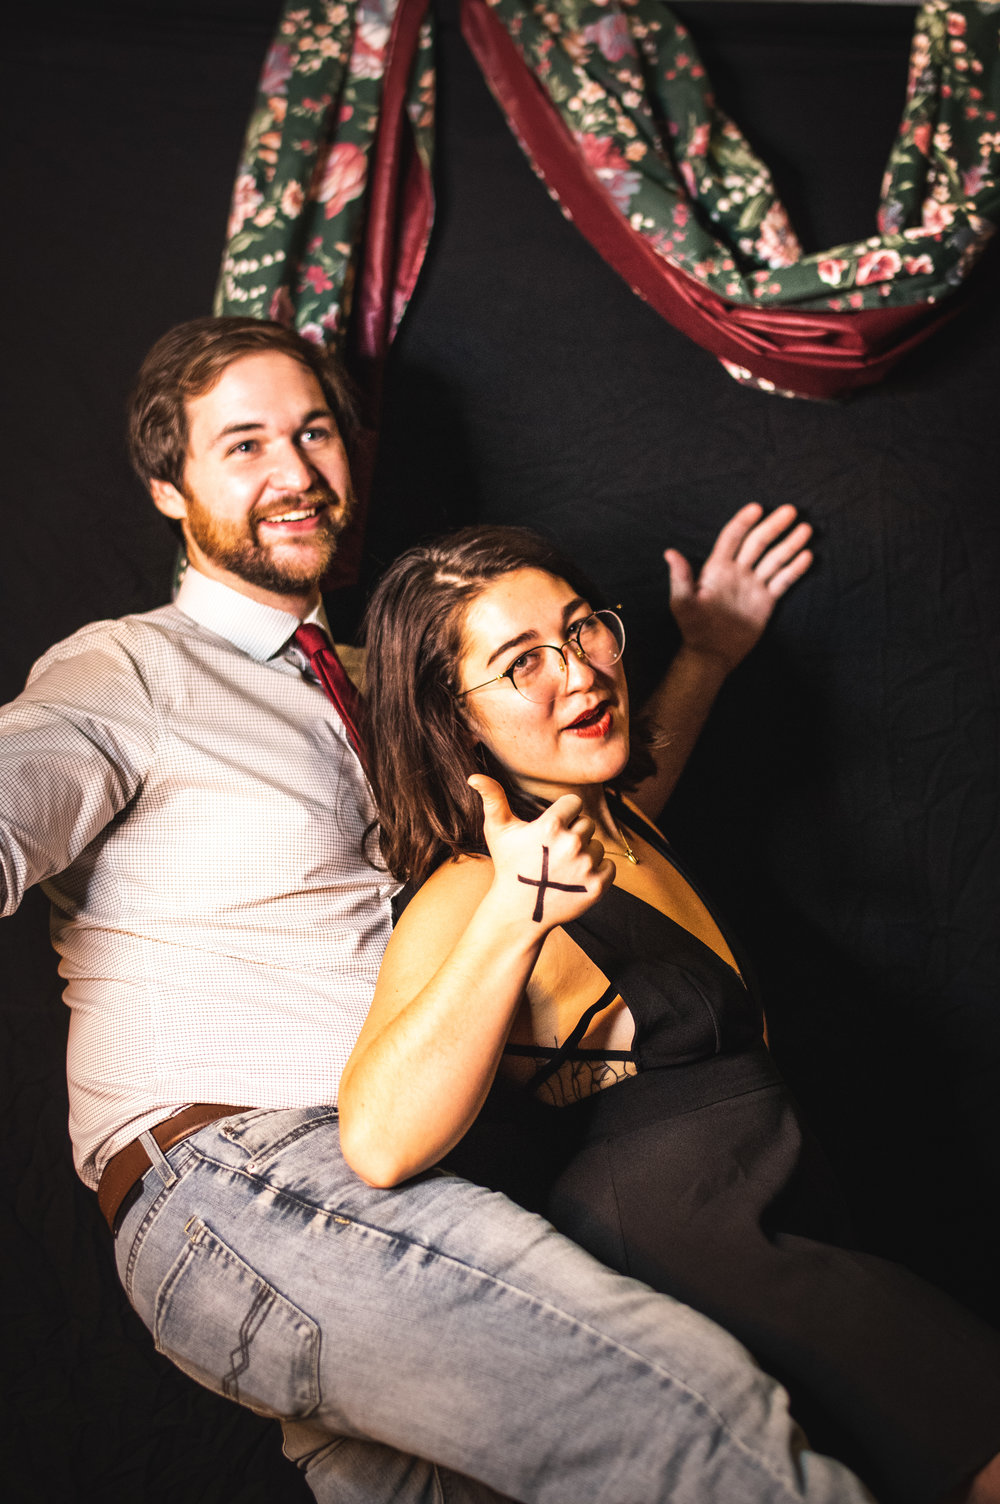  Friends, bandmates, and lovers of all kinds posed for photos at the DIY Prom. 